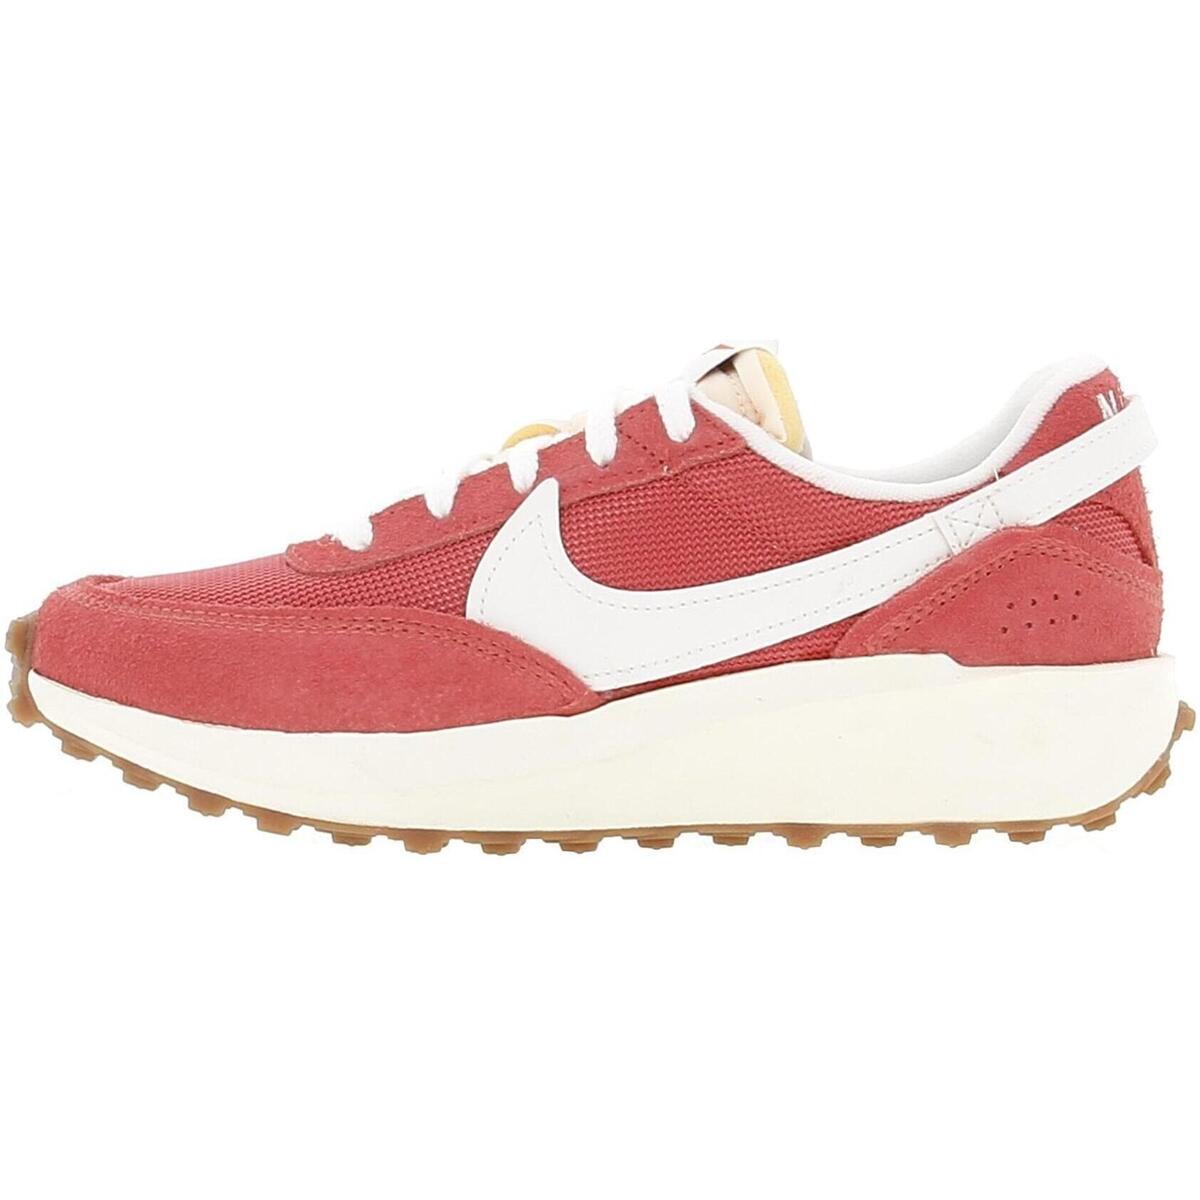 Nike Rose Wmns waffle debut vntg oq2w476S